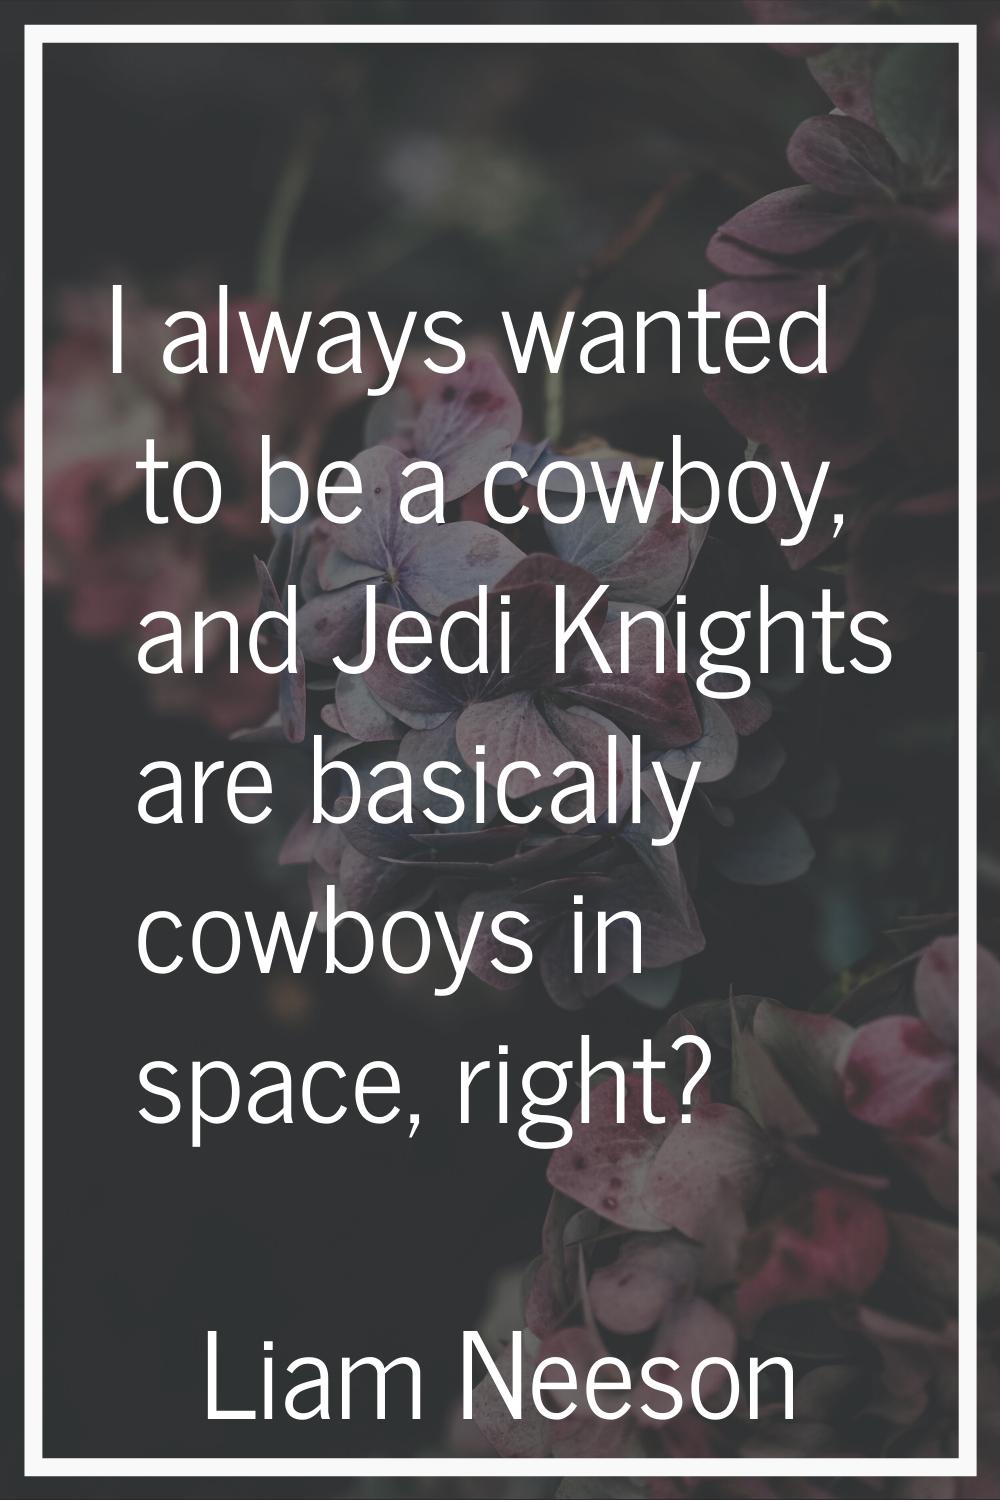 I always wanted to be a cowboy, and Jedi Knights are basically cowboys in space, right?